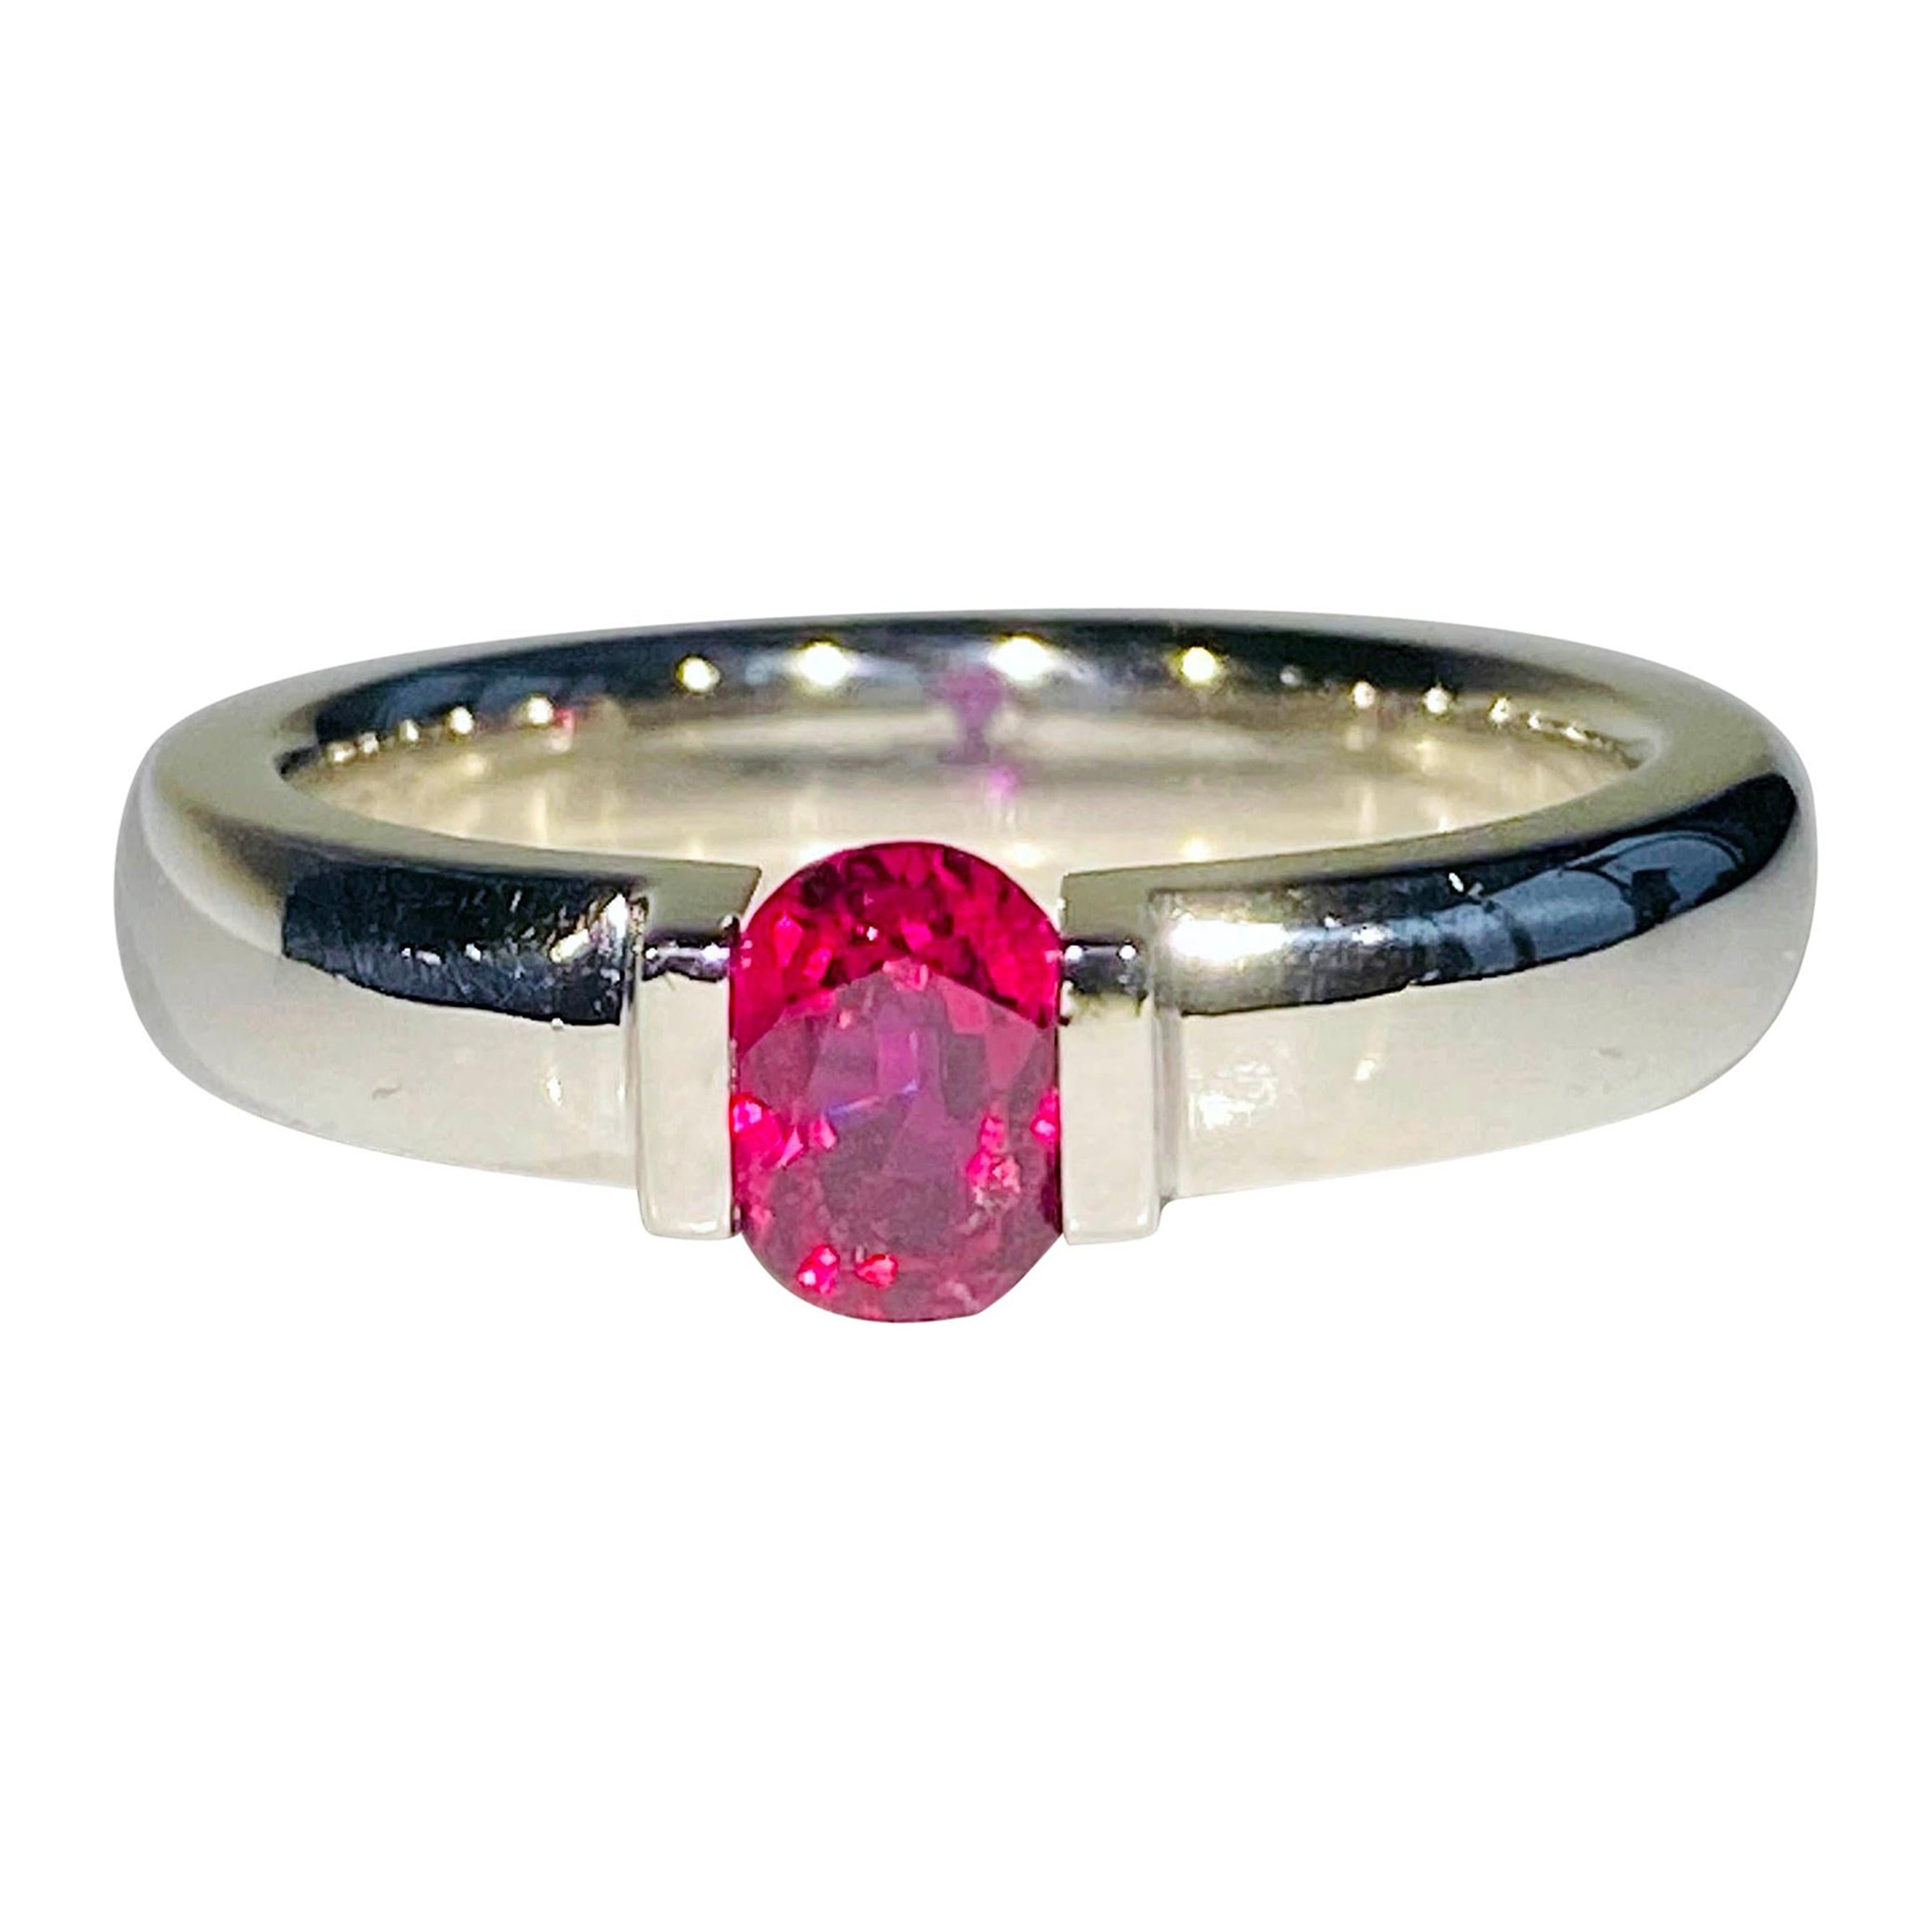 A Kary Adam Designed, 18kt White Gold Ruby Tension Ring